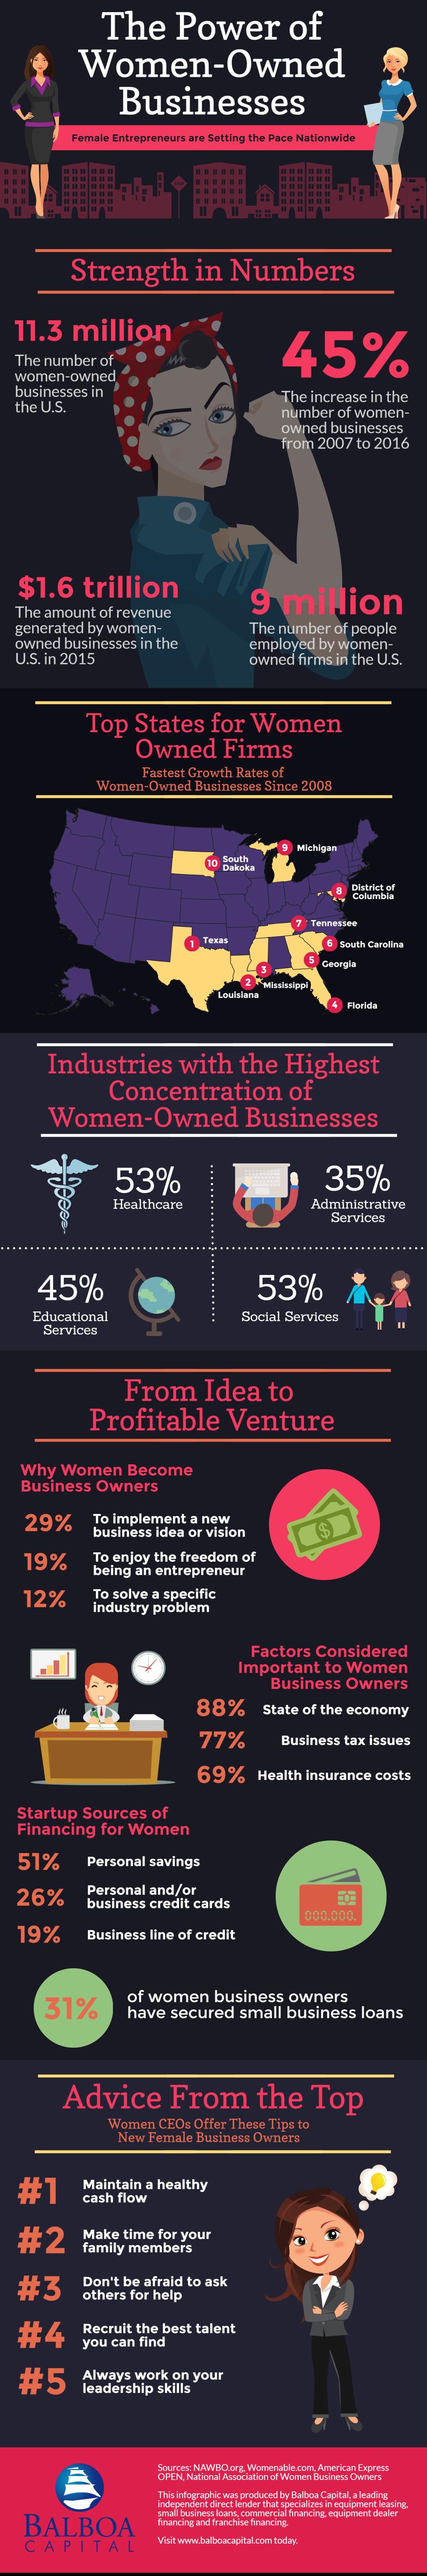 infographic women in business